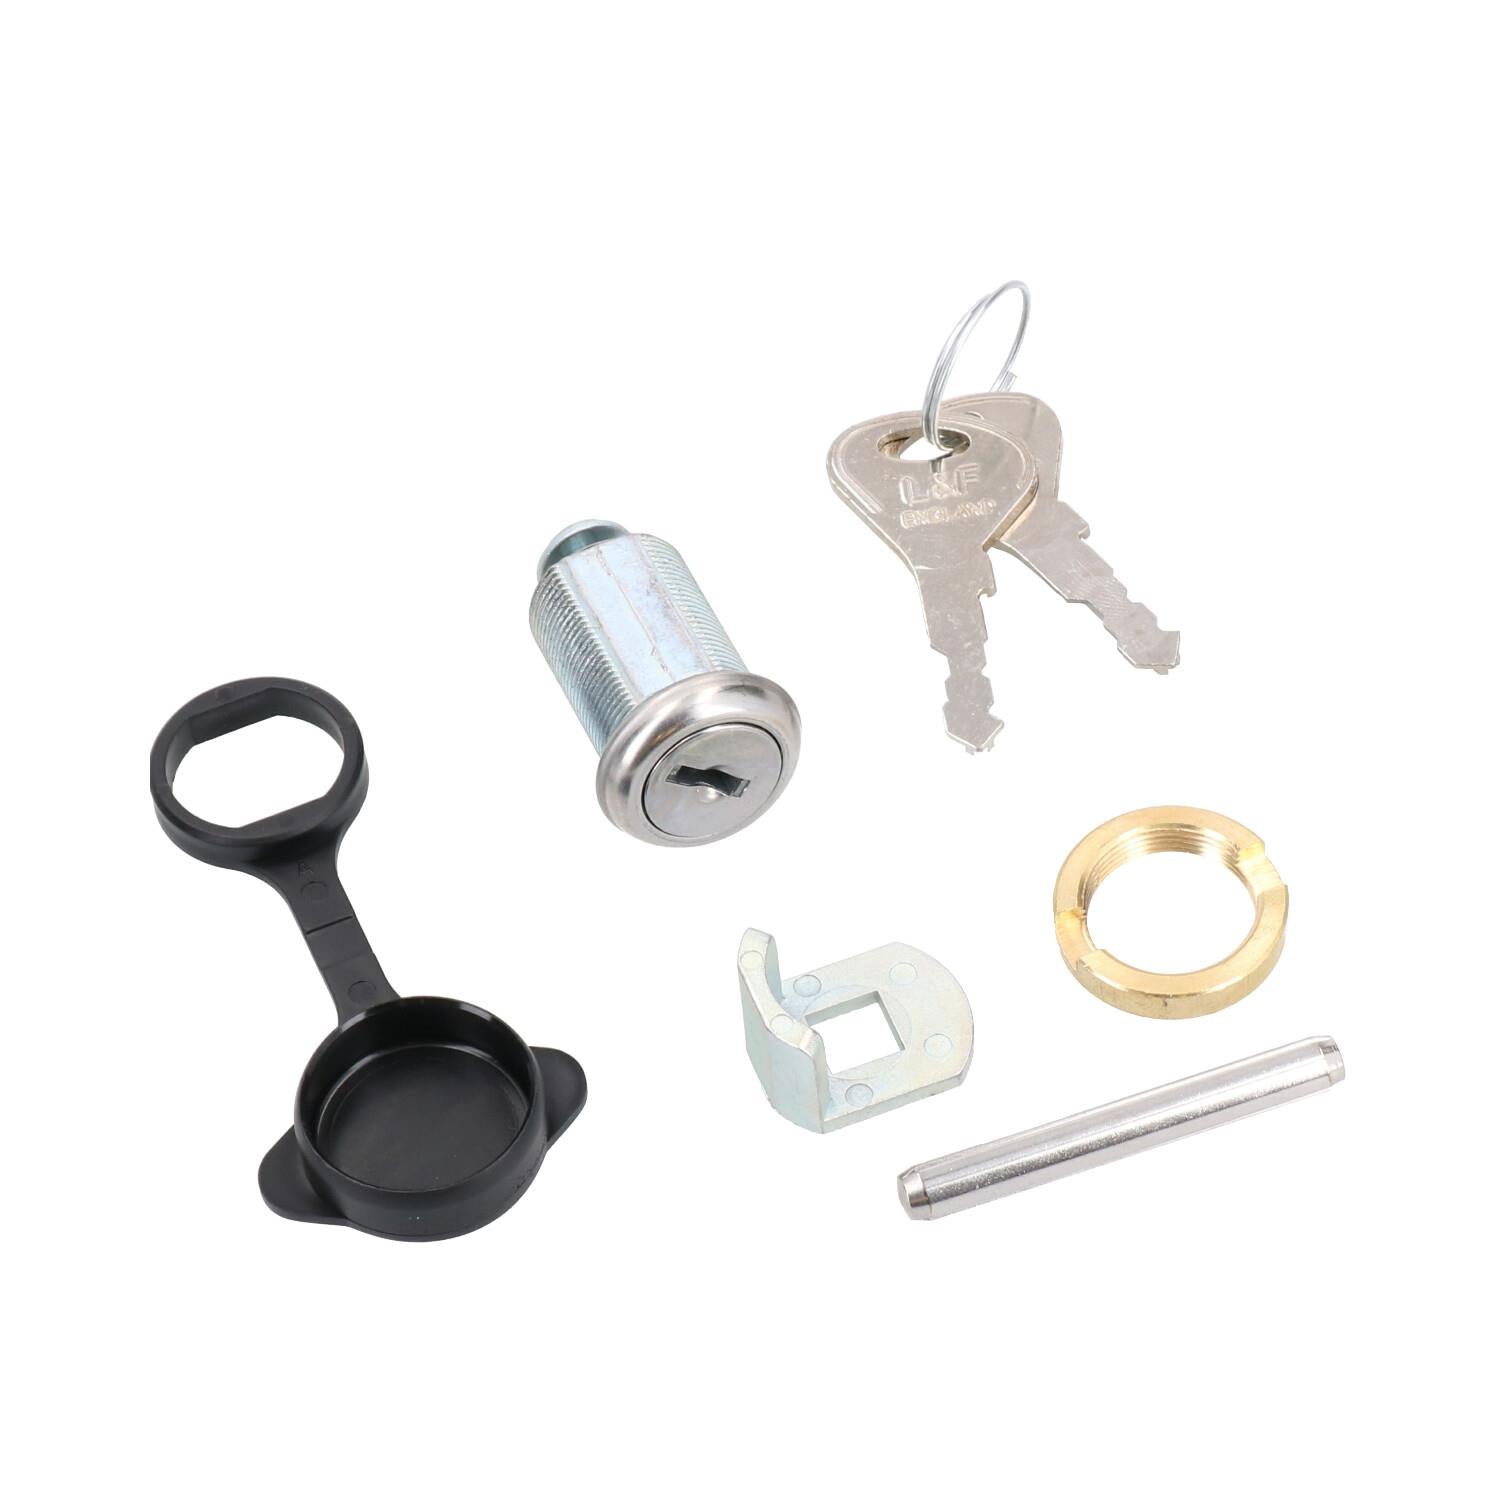 Genuine Replacement Hitch Lock Kit for Knott Cast Trailer Couplings with 2 Keys